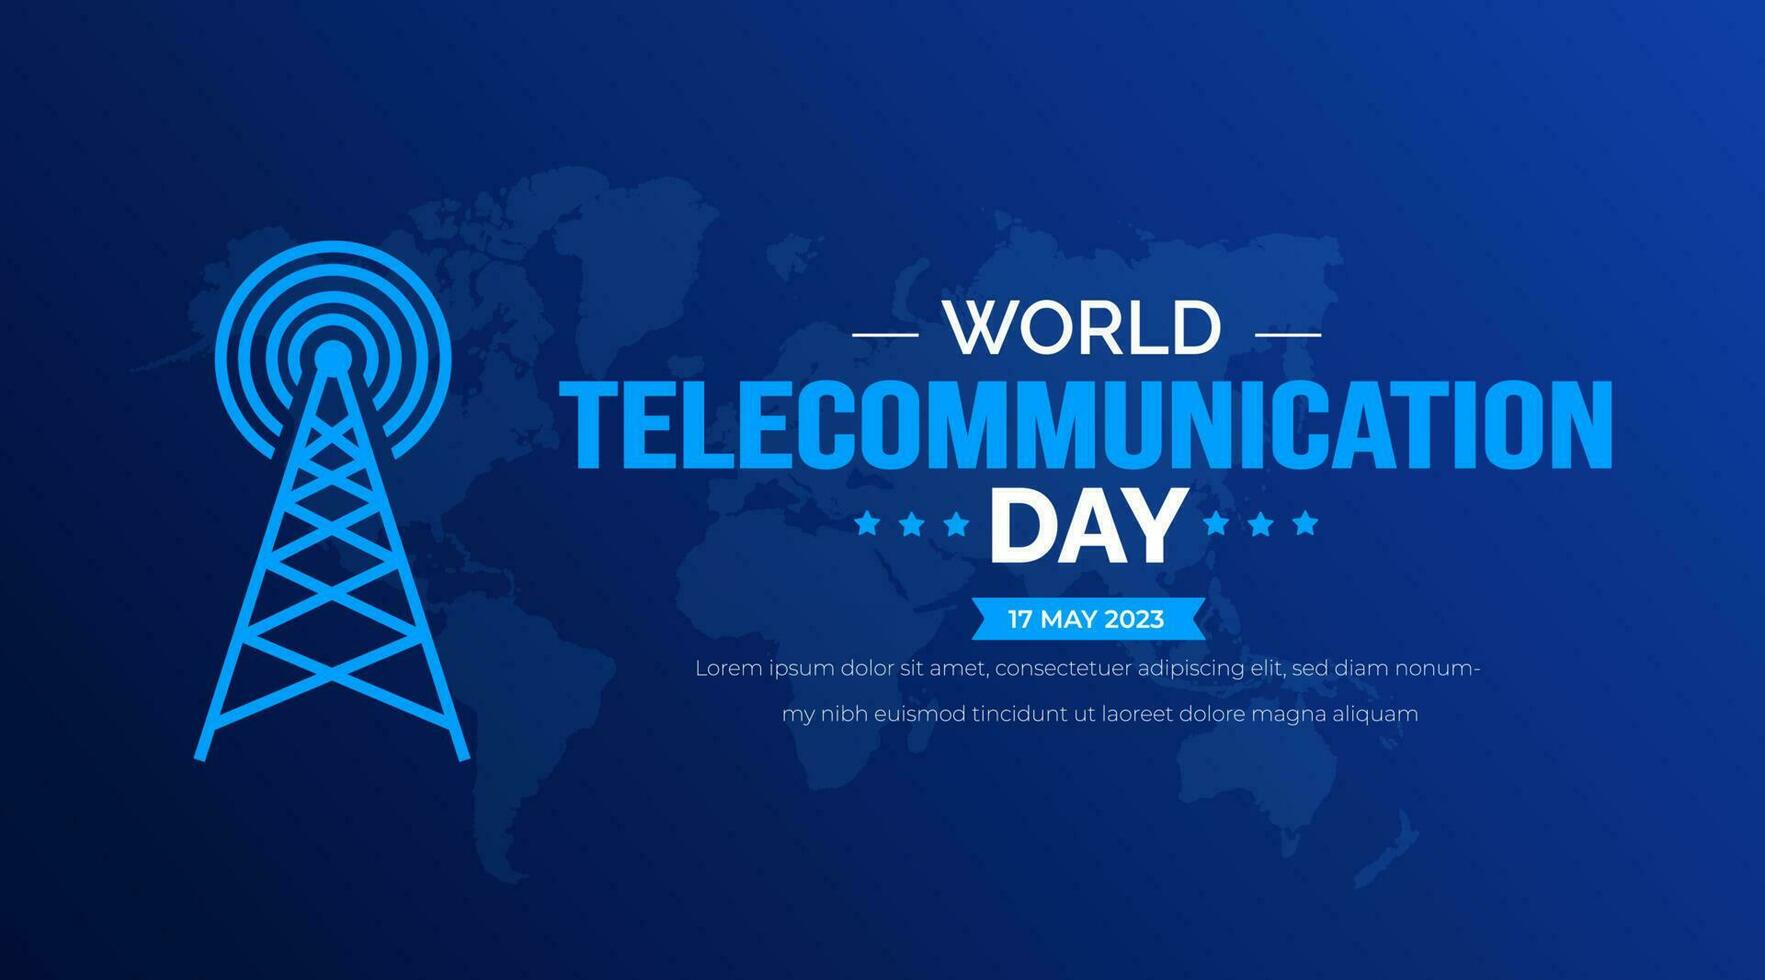 World Telecommunication Day background or banner design template vector